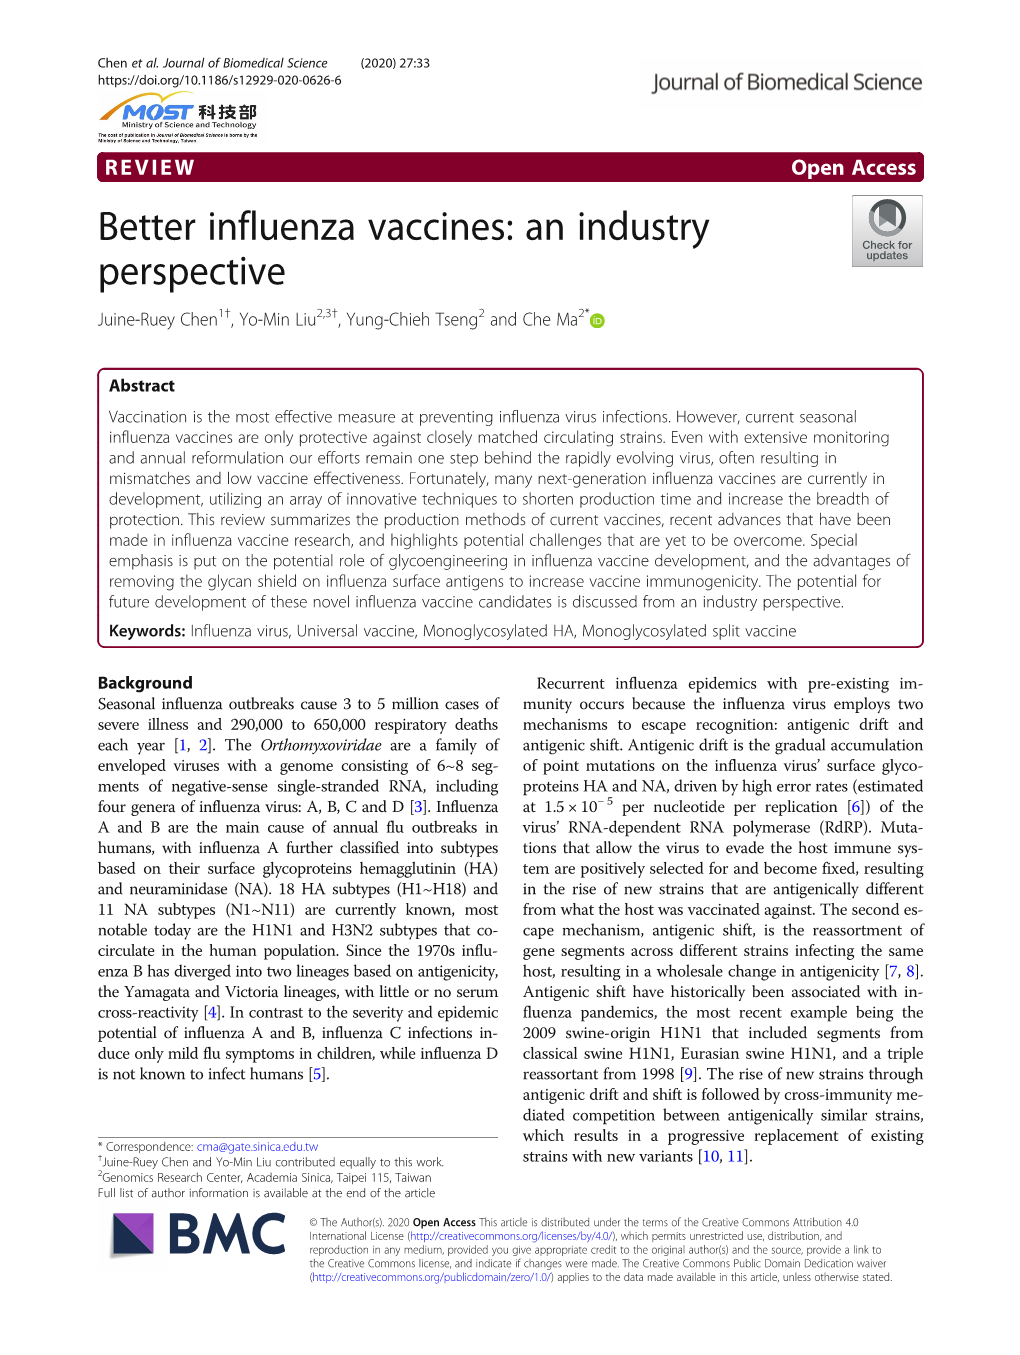 Better Influenza Vaccines: an Industry Perspective Juine-Ruey Chen1†, Yo-Min Liu2,3†, Yung-Chieh Tseng2 and Che Ma2*